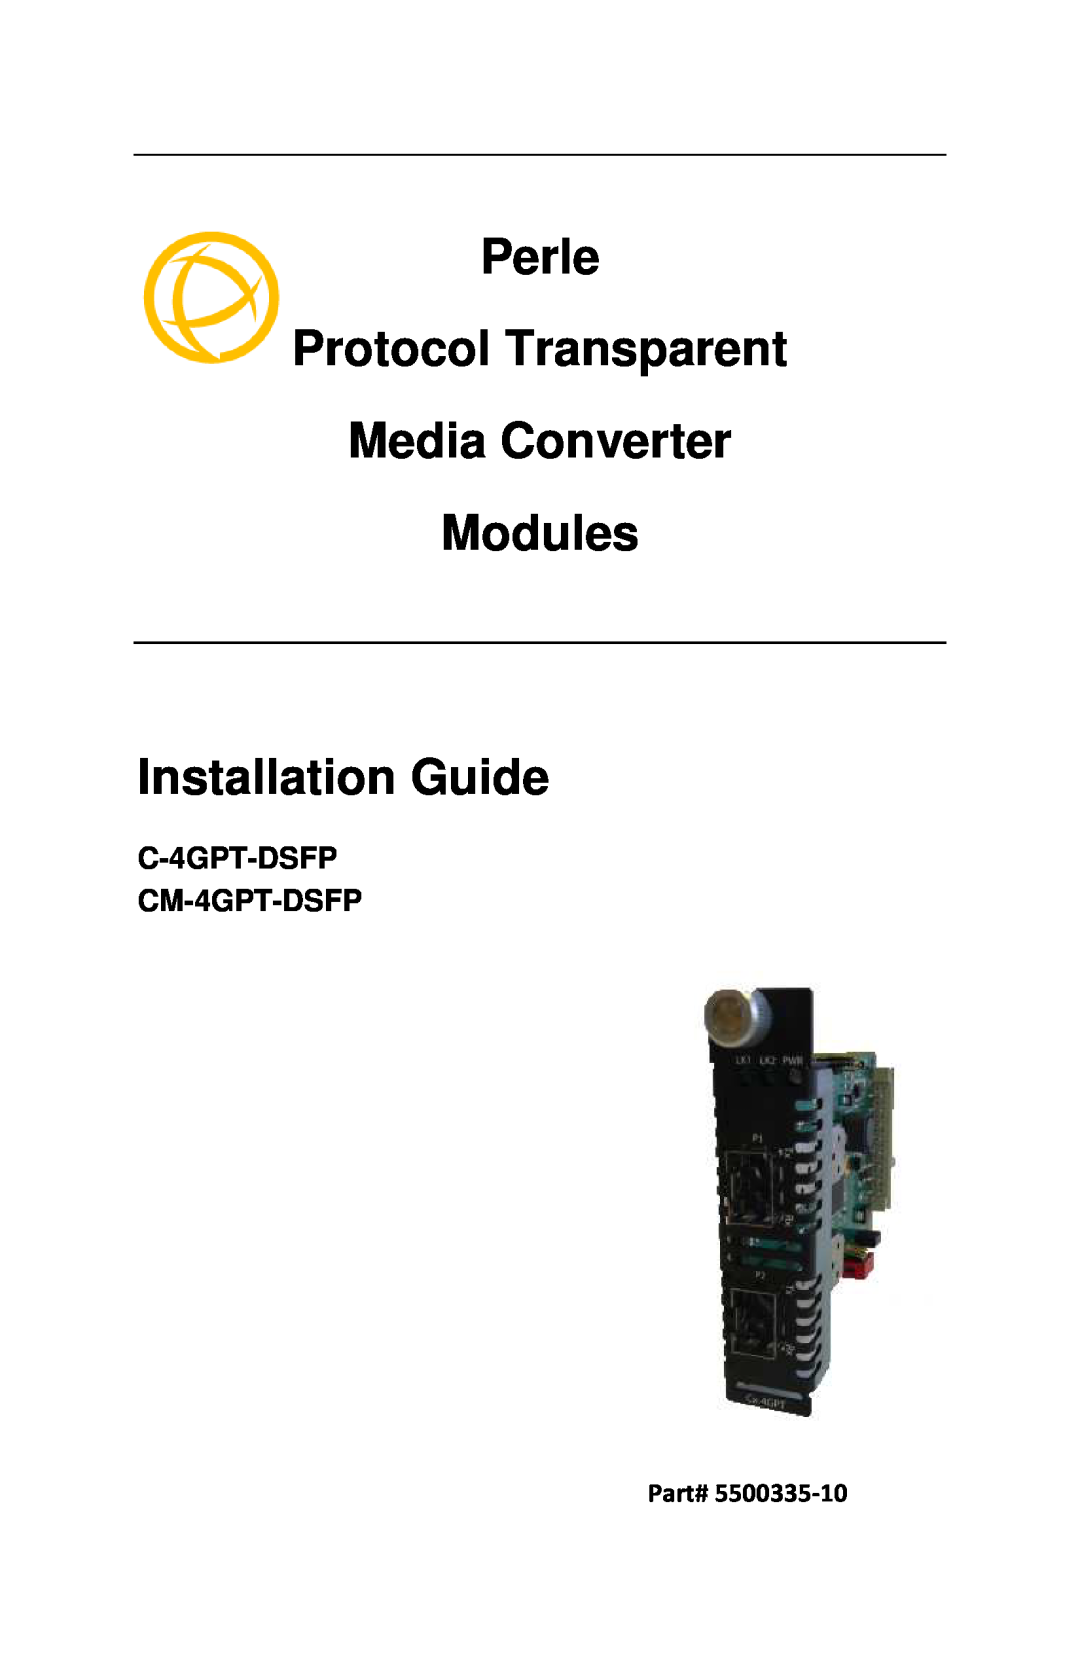 Perle Systems CM-4GPT-DSFP manual Perle Protocol Transparent Media Converter Modules Installation Guide, Part# 